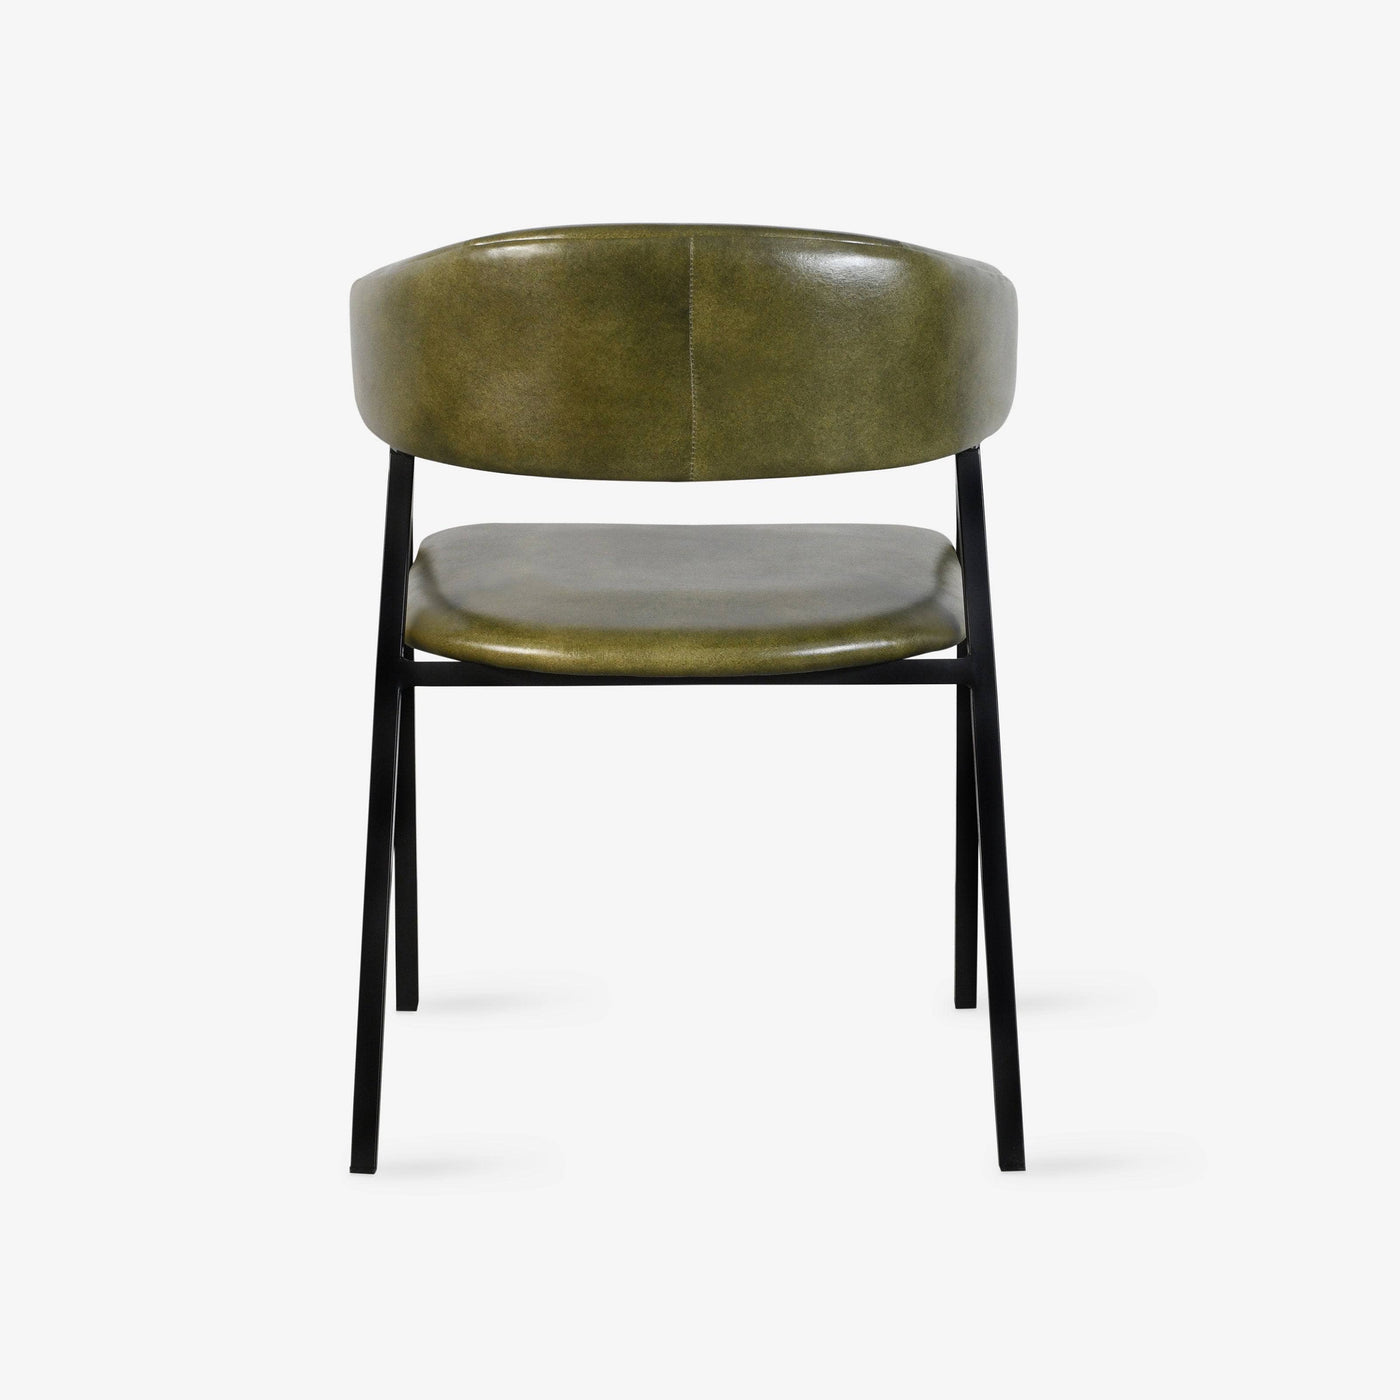 Iron Leather Accent Chair, Green, 54x58x74 cm - 4